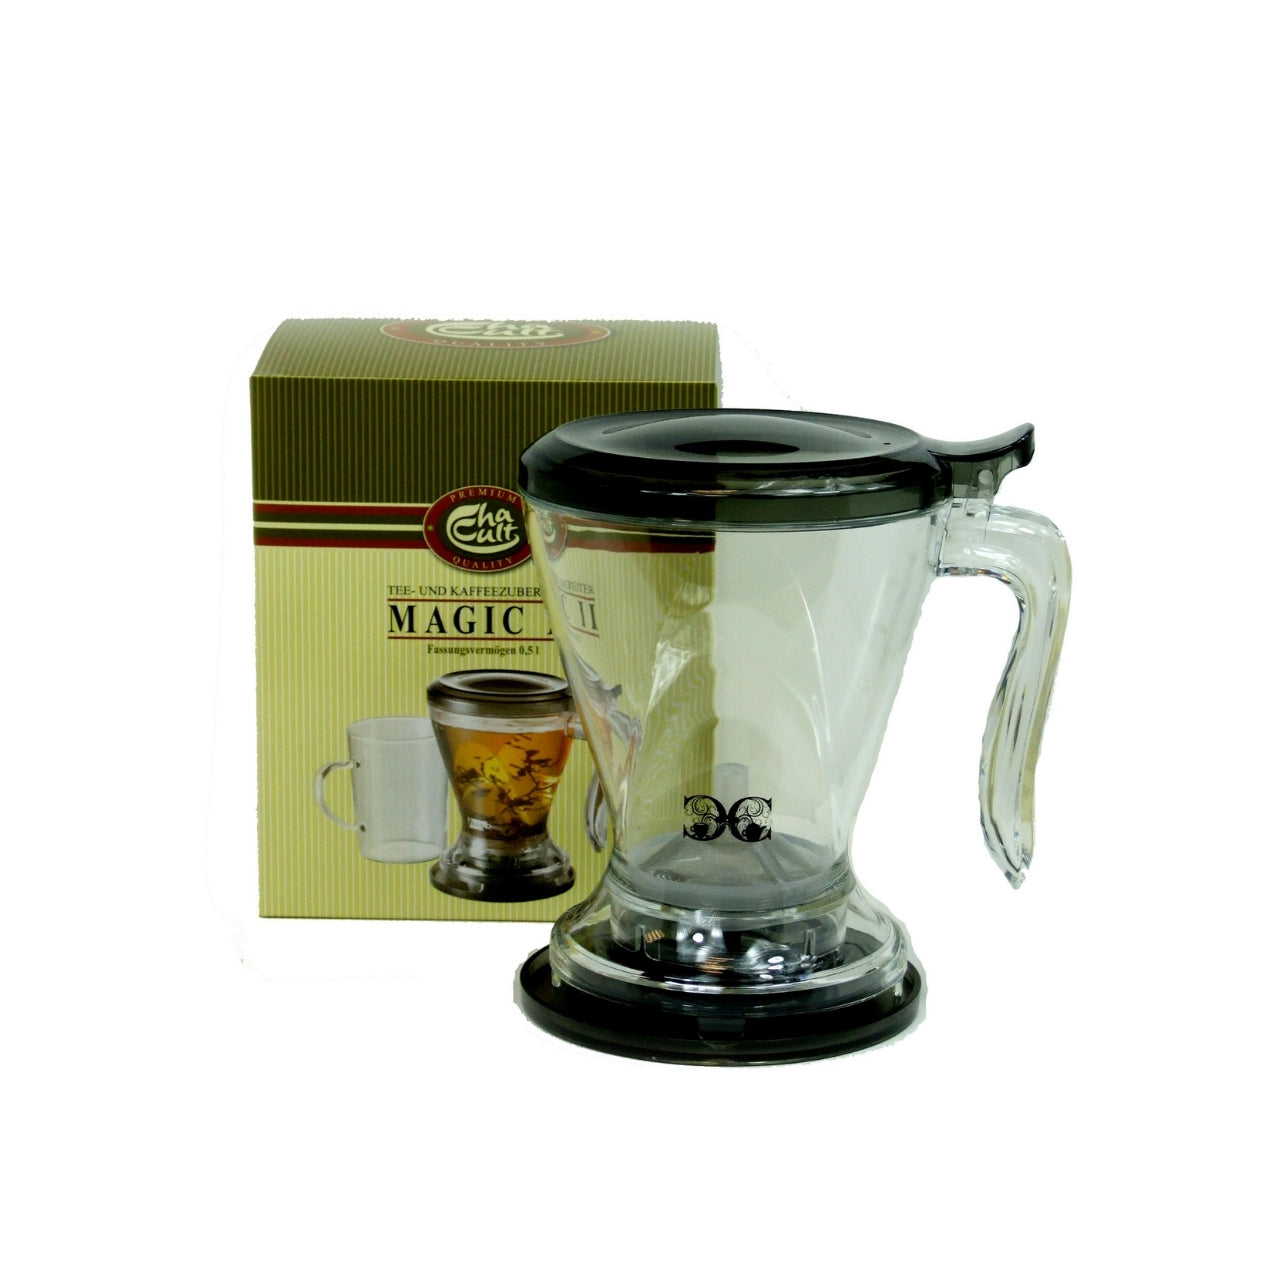 Magic Gravity Infuser For Tea & Coffee with the box